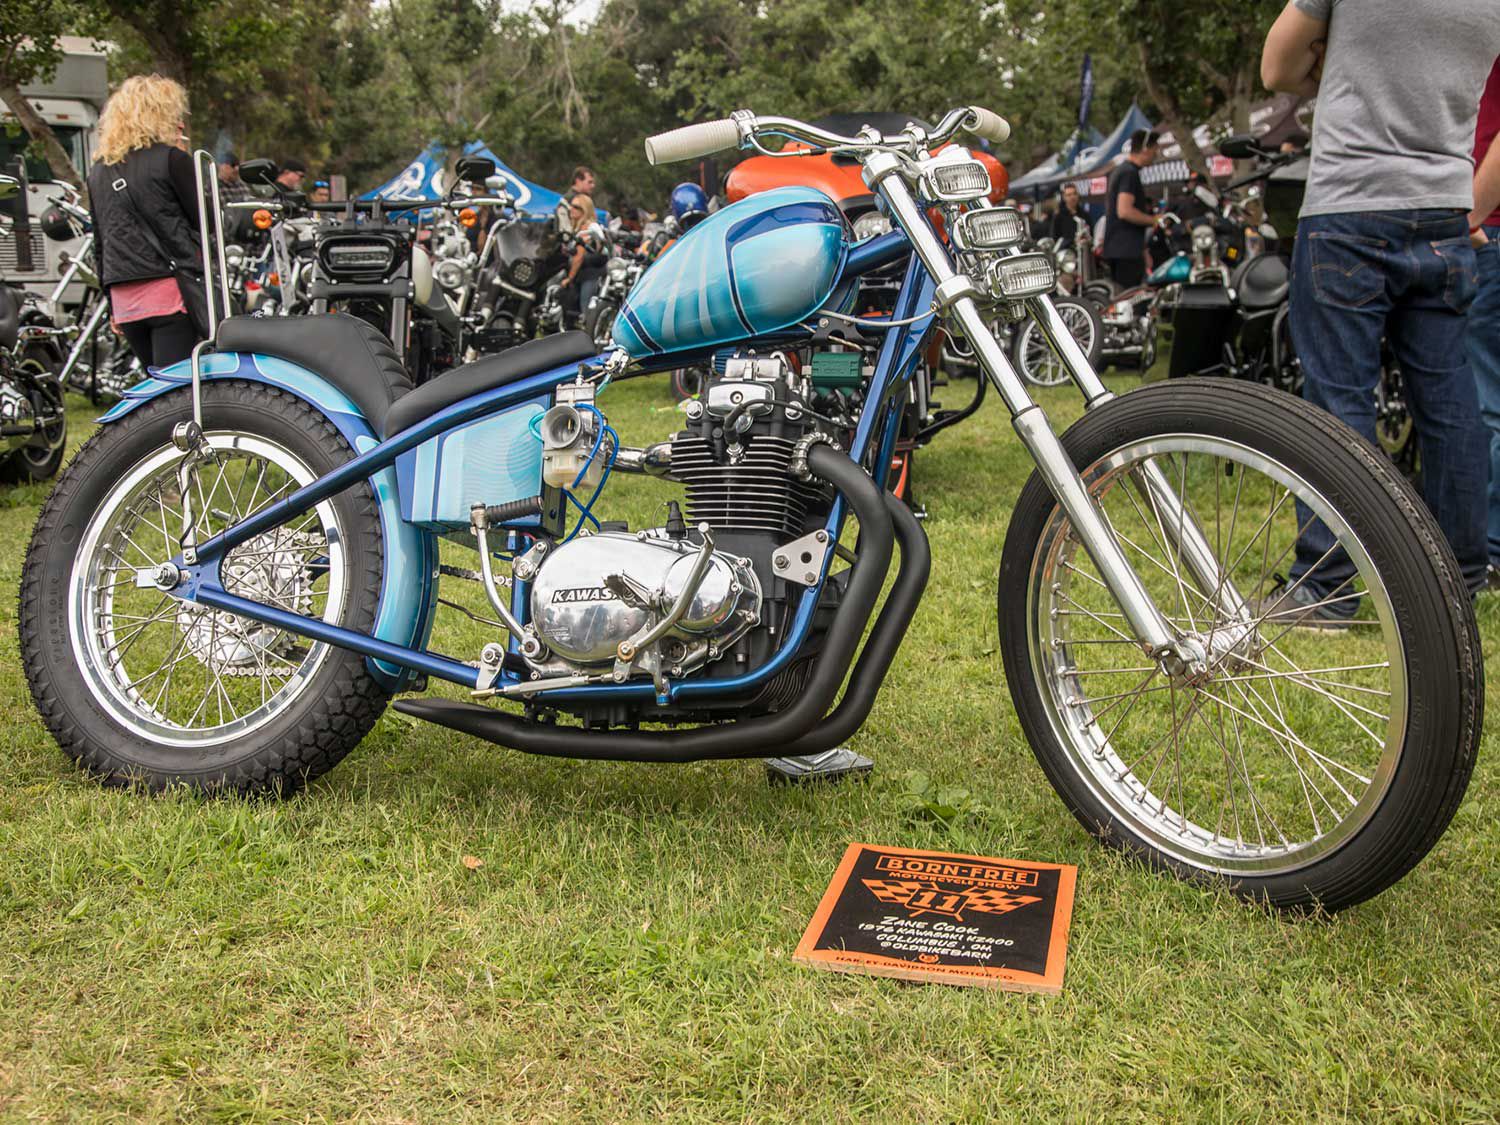 Born Free 11 Vintage Motorcycle Show 2019 Motorcyclist